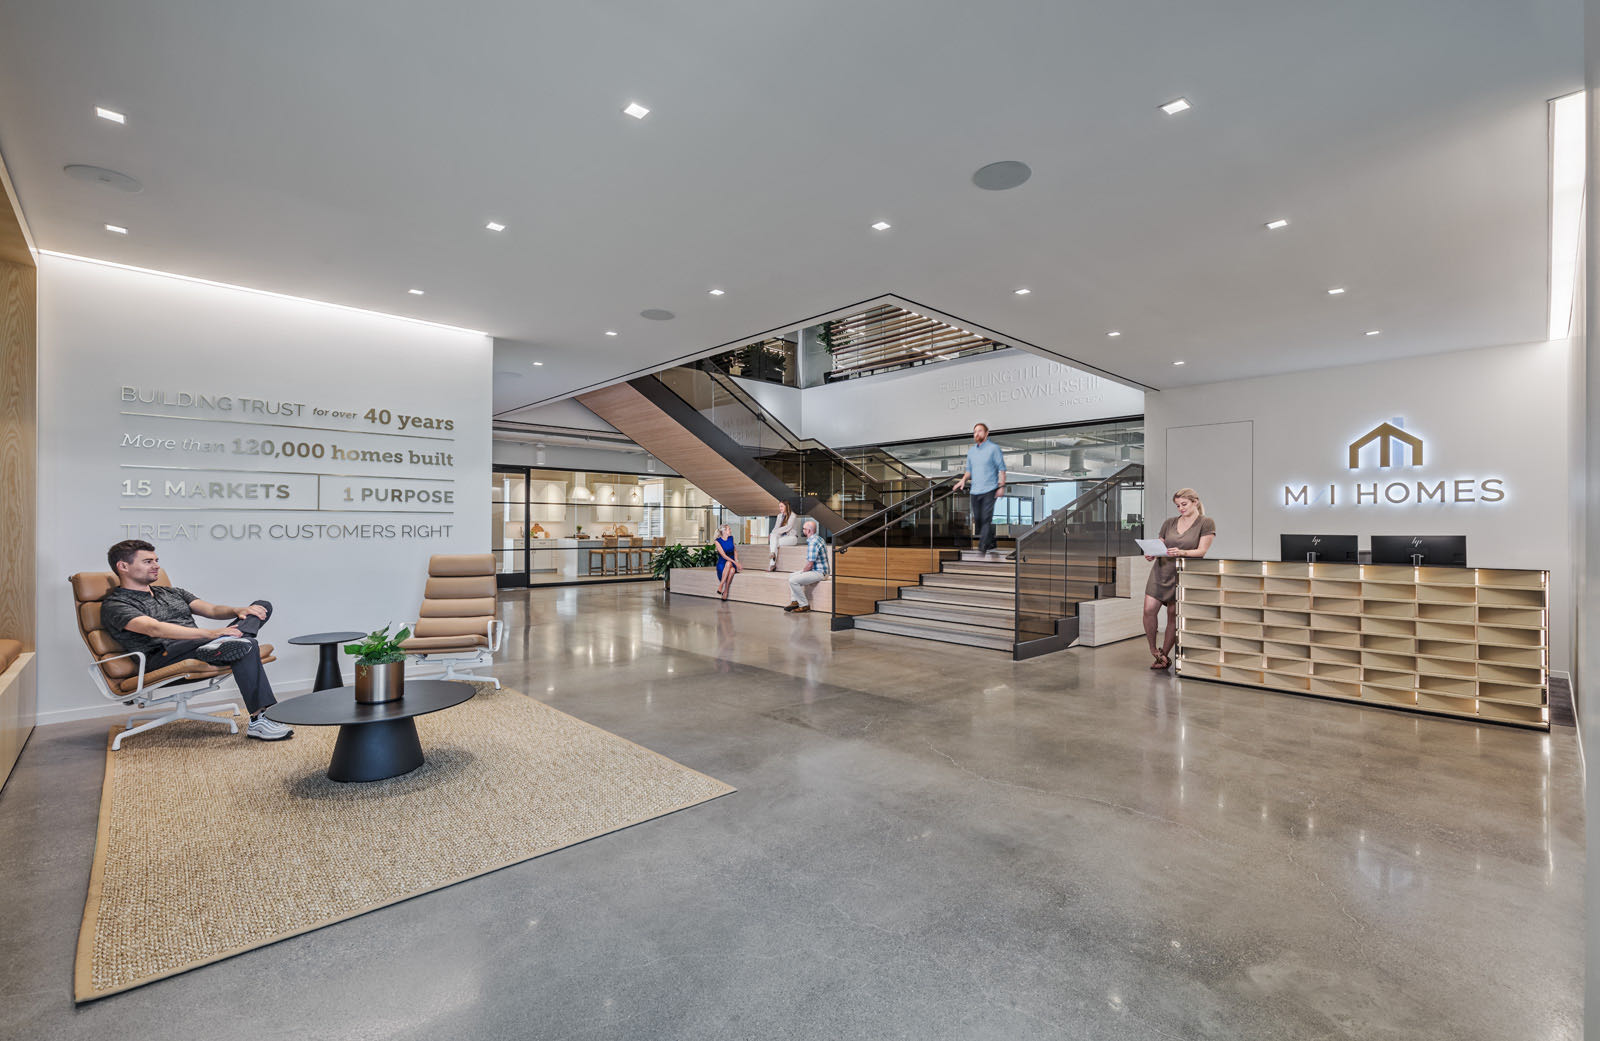 A Tour of M/I Homes' New Columbus Headquarters - Officelovin'